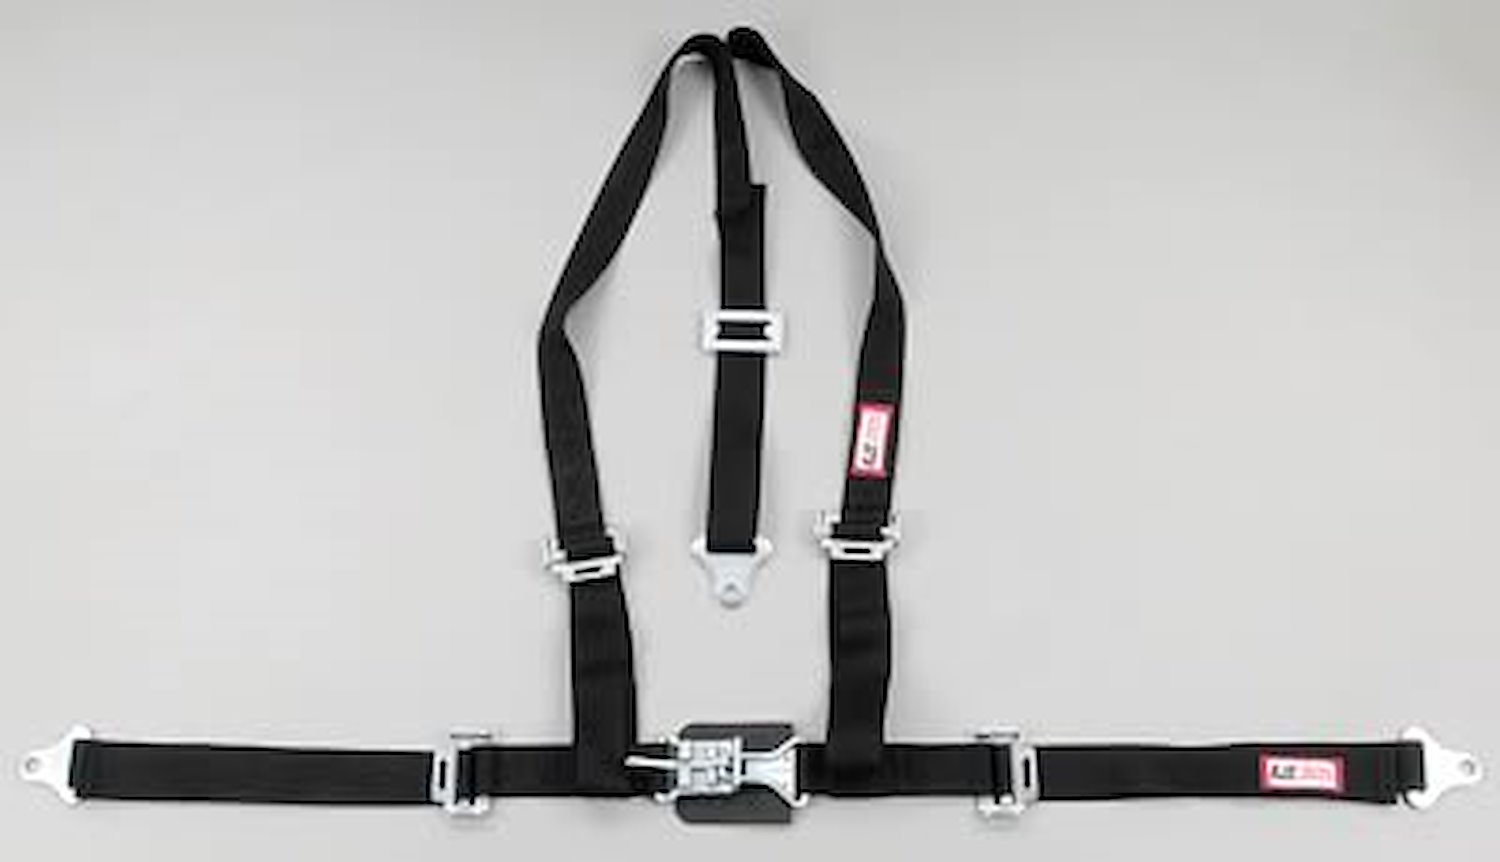 NON-SFI L&L HARNESS 3 PULL UP Lap Belt BOLT SEWN IN 2 S.H. Individual ROLL BAR Mount w/STERNUM STRAP WRAP/BOLT RED